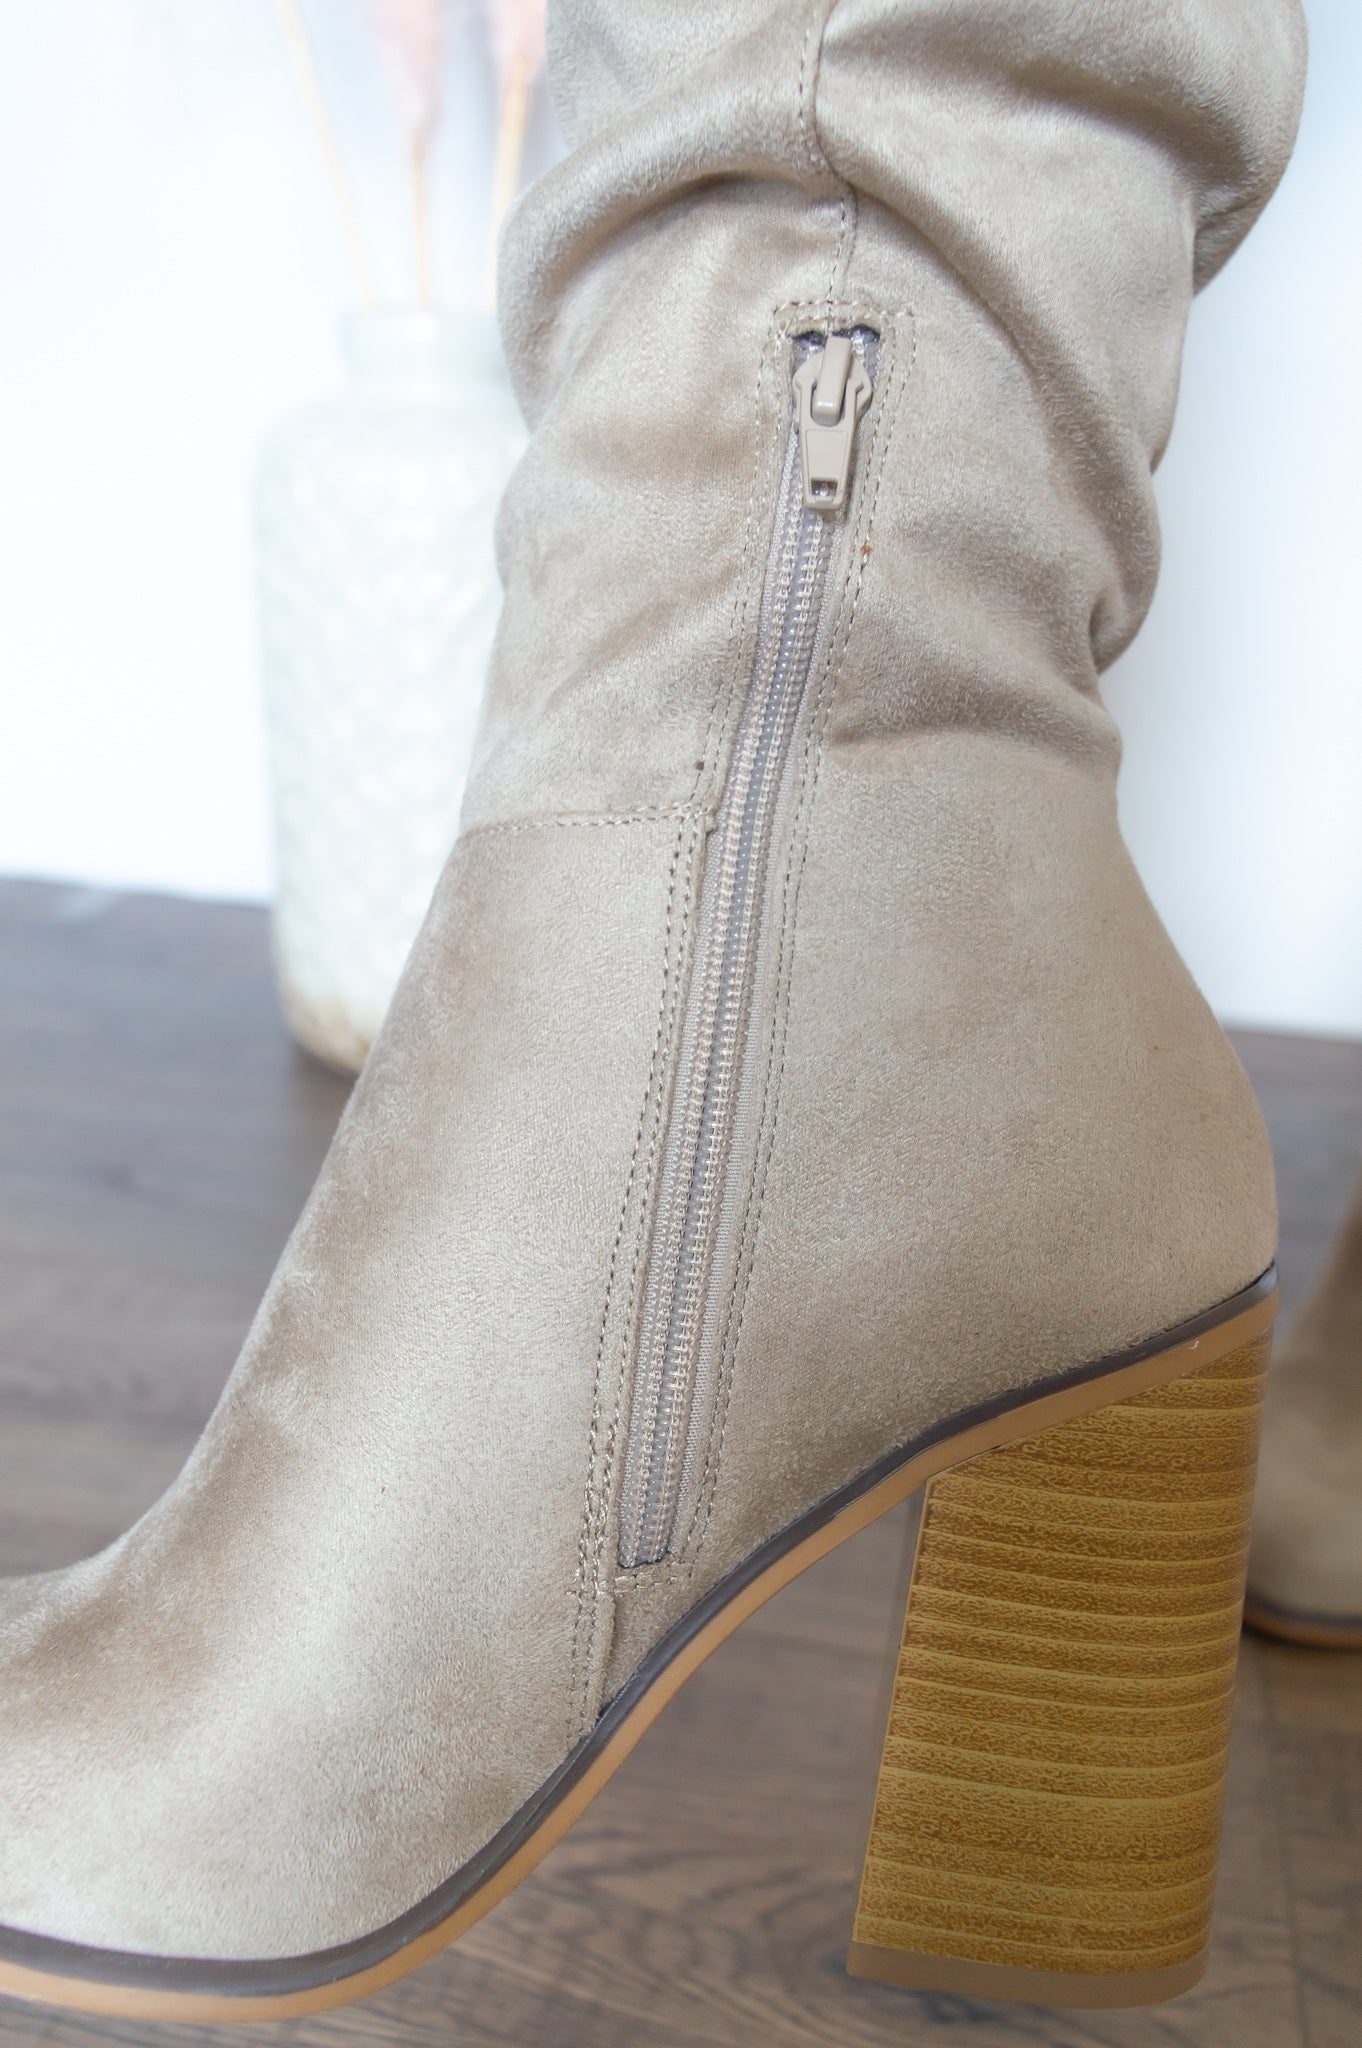 knee high boots tall boots taupe boots taupe suede boots neutral boots summer boots slouchy boots tan boots cream boots relaxed boots Nashville boots Nashville fashion Nashville look